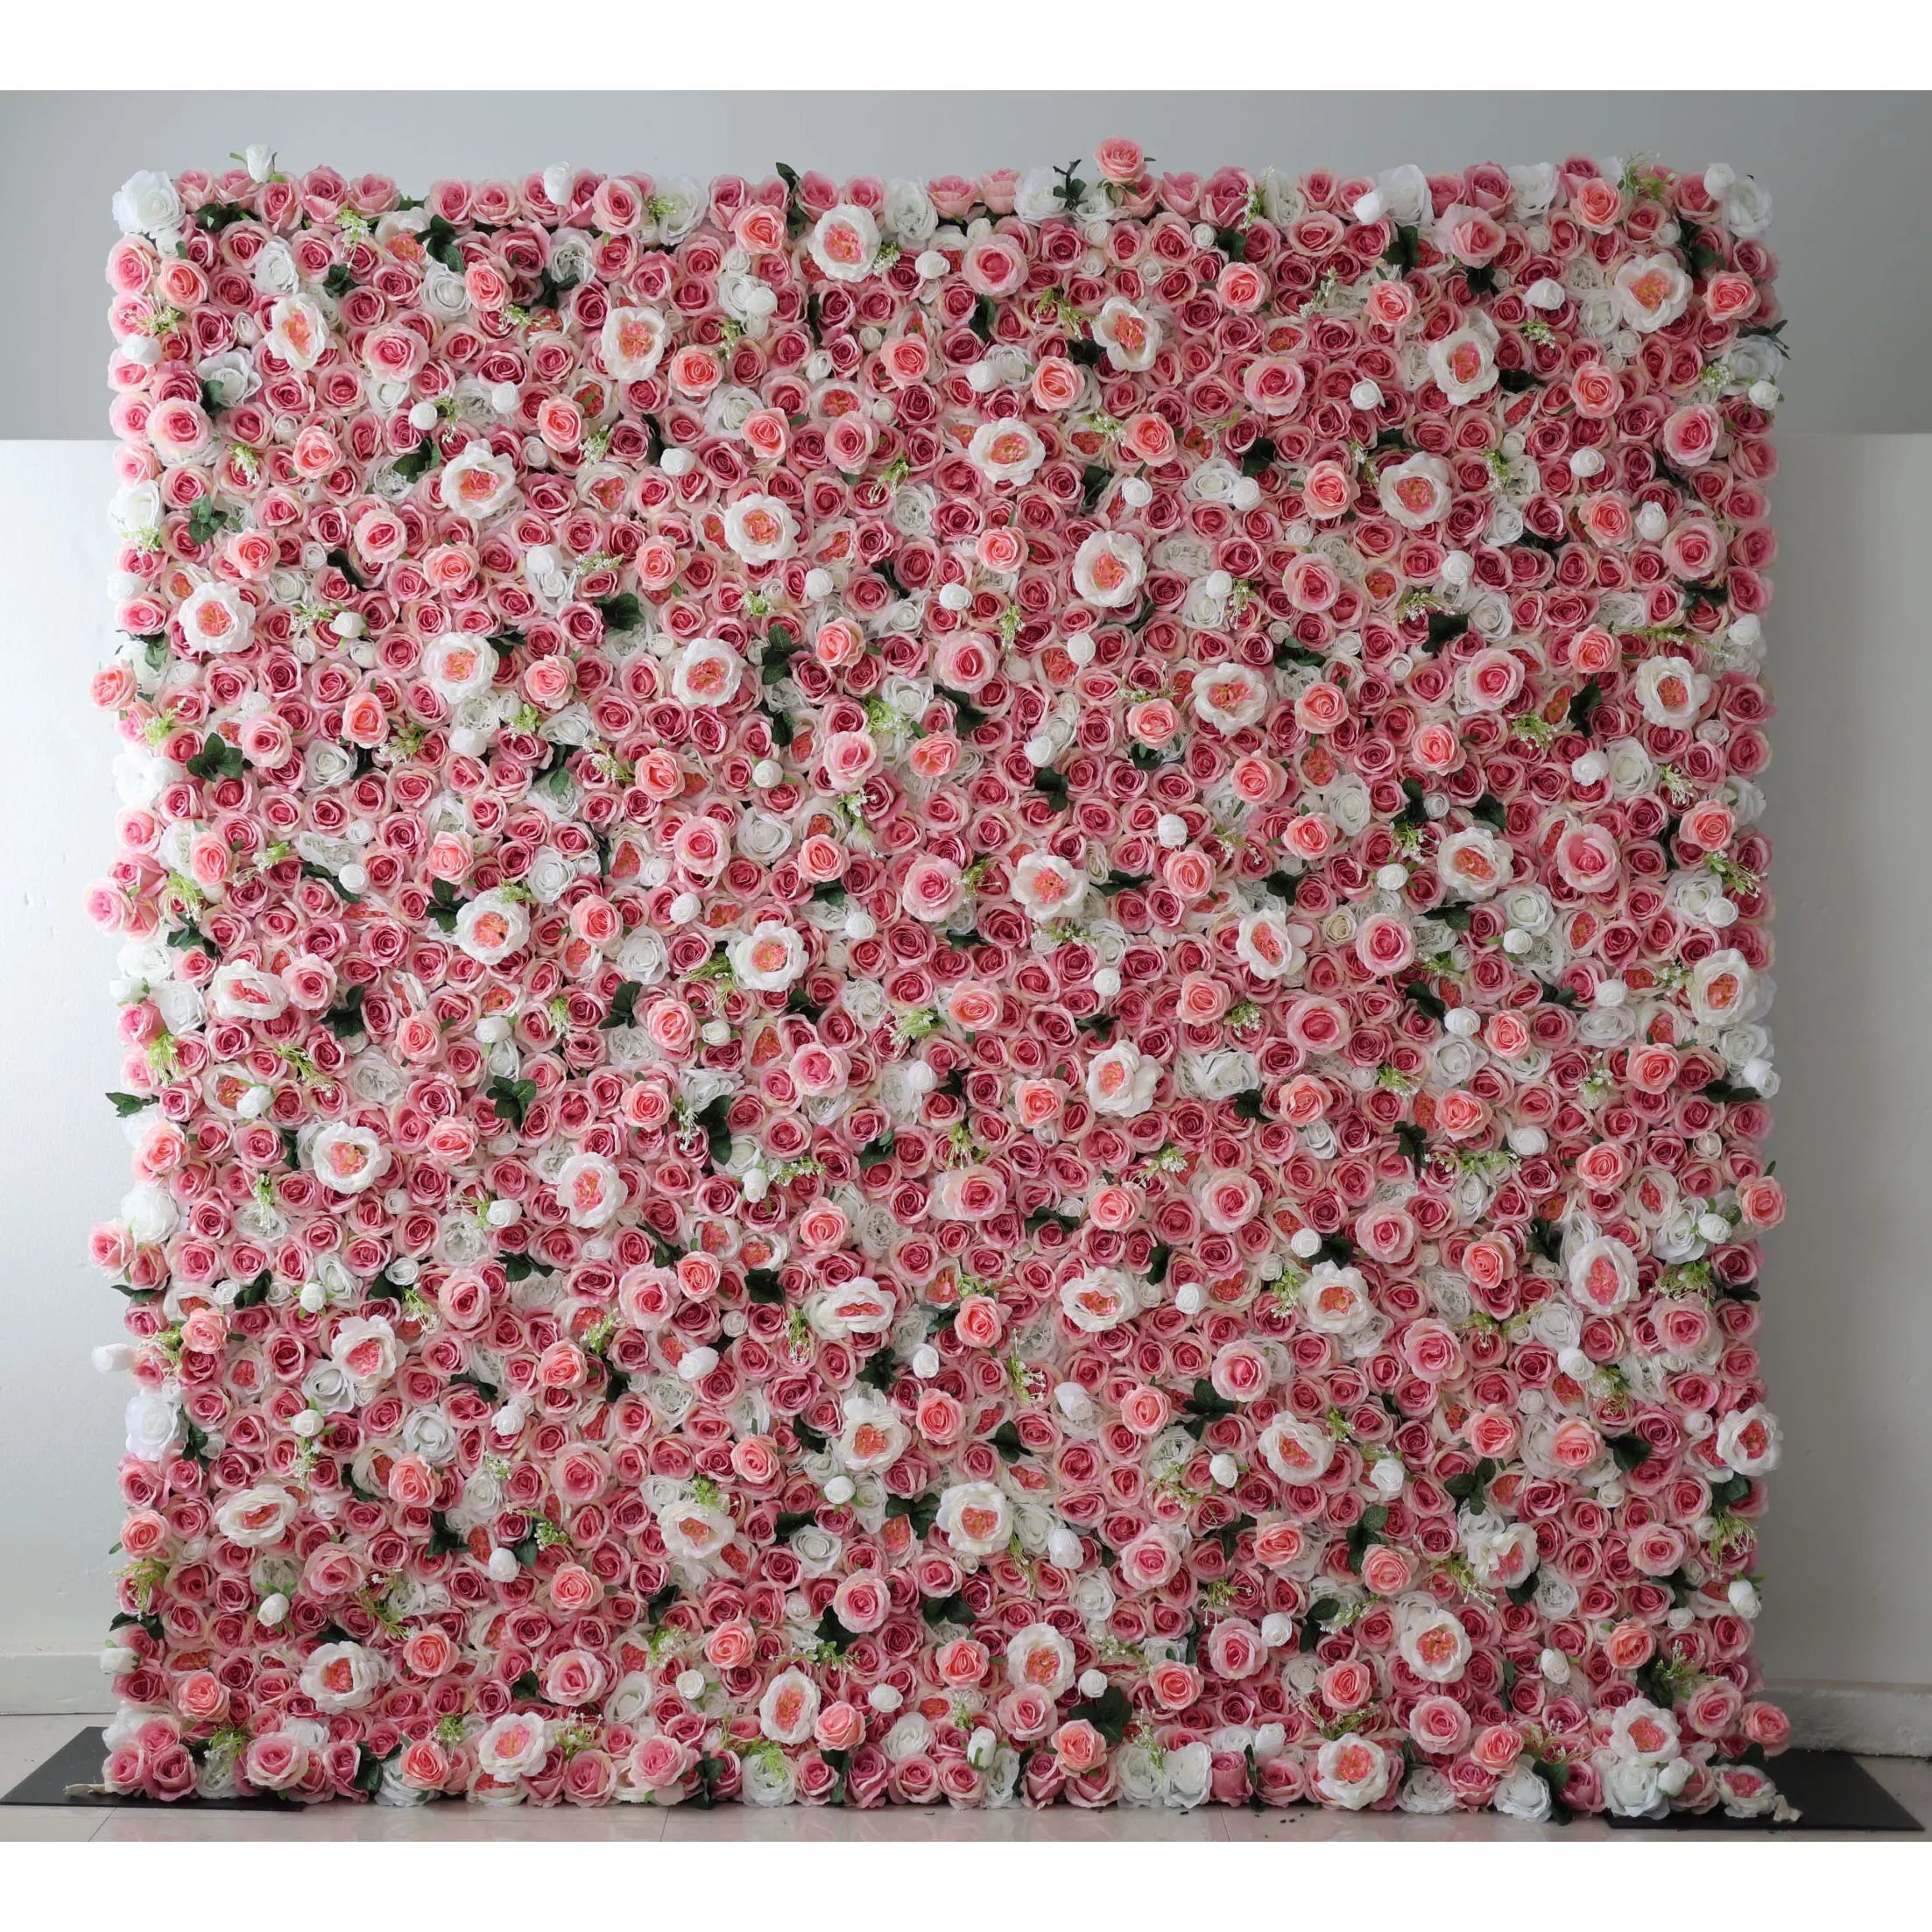 Valar Flowers Presents: The Timeless Artificial Fabric Flower Wall – A Radiant Display of Rosy Elegance-VF-207